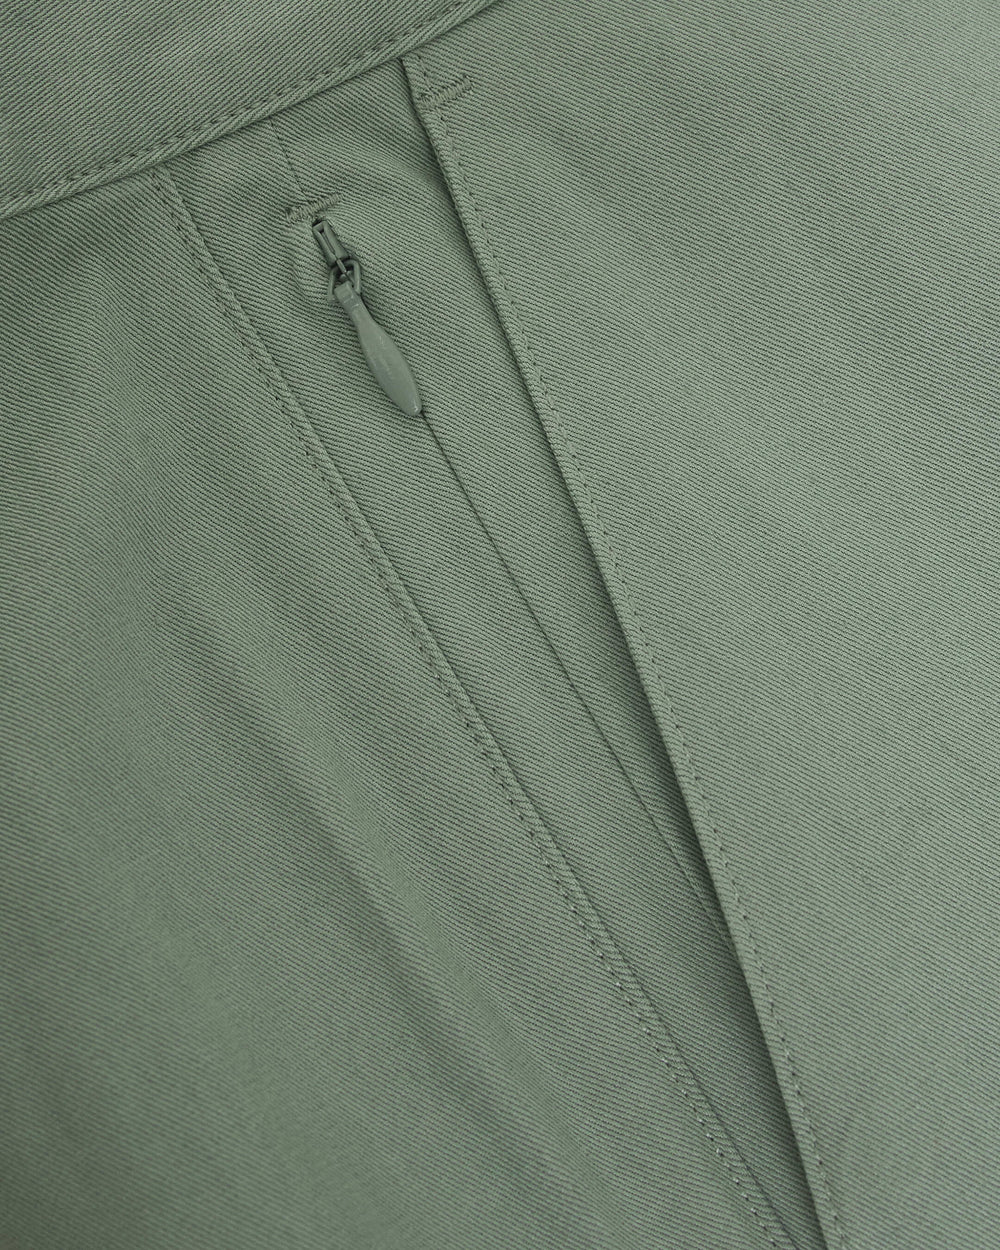 Meadow Straight Twill Chino Pant